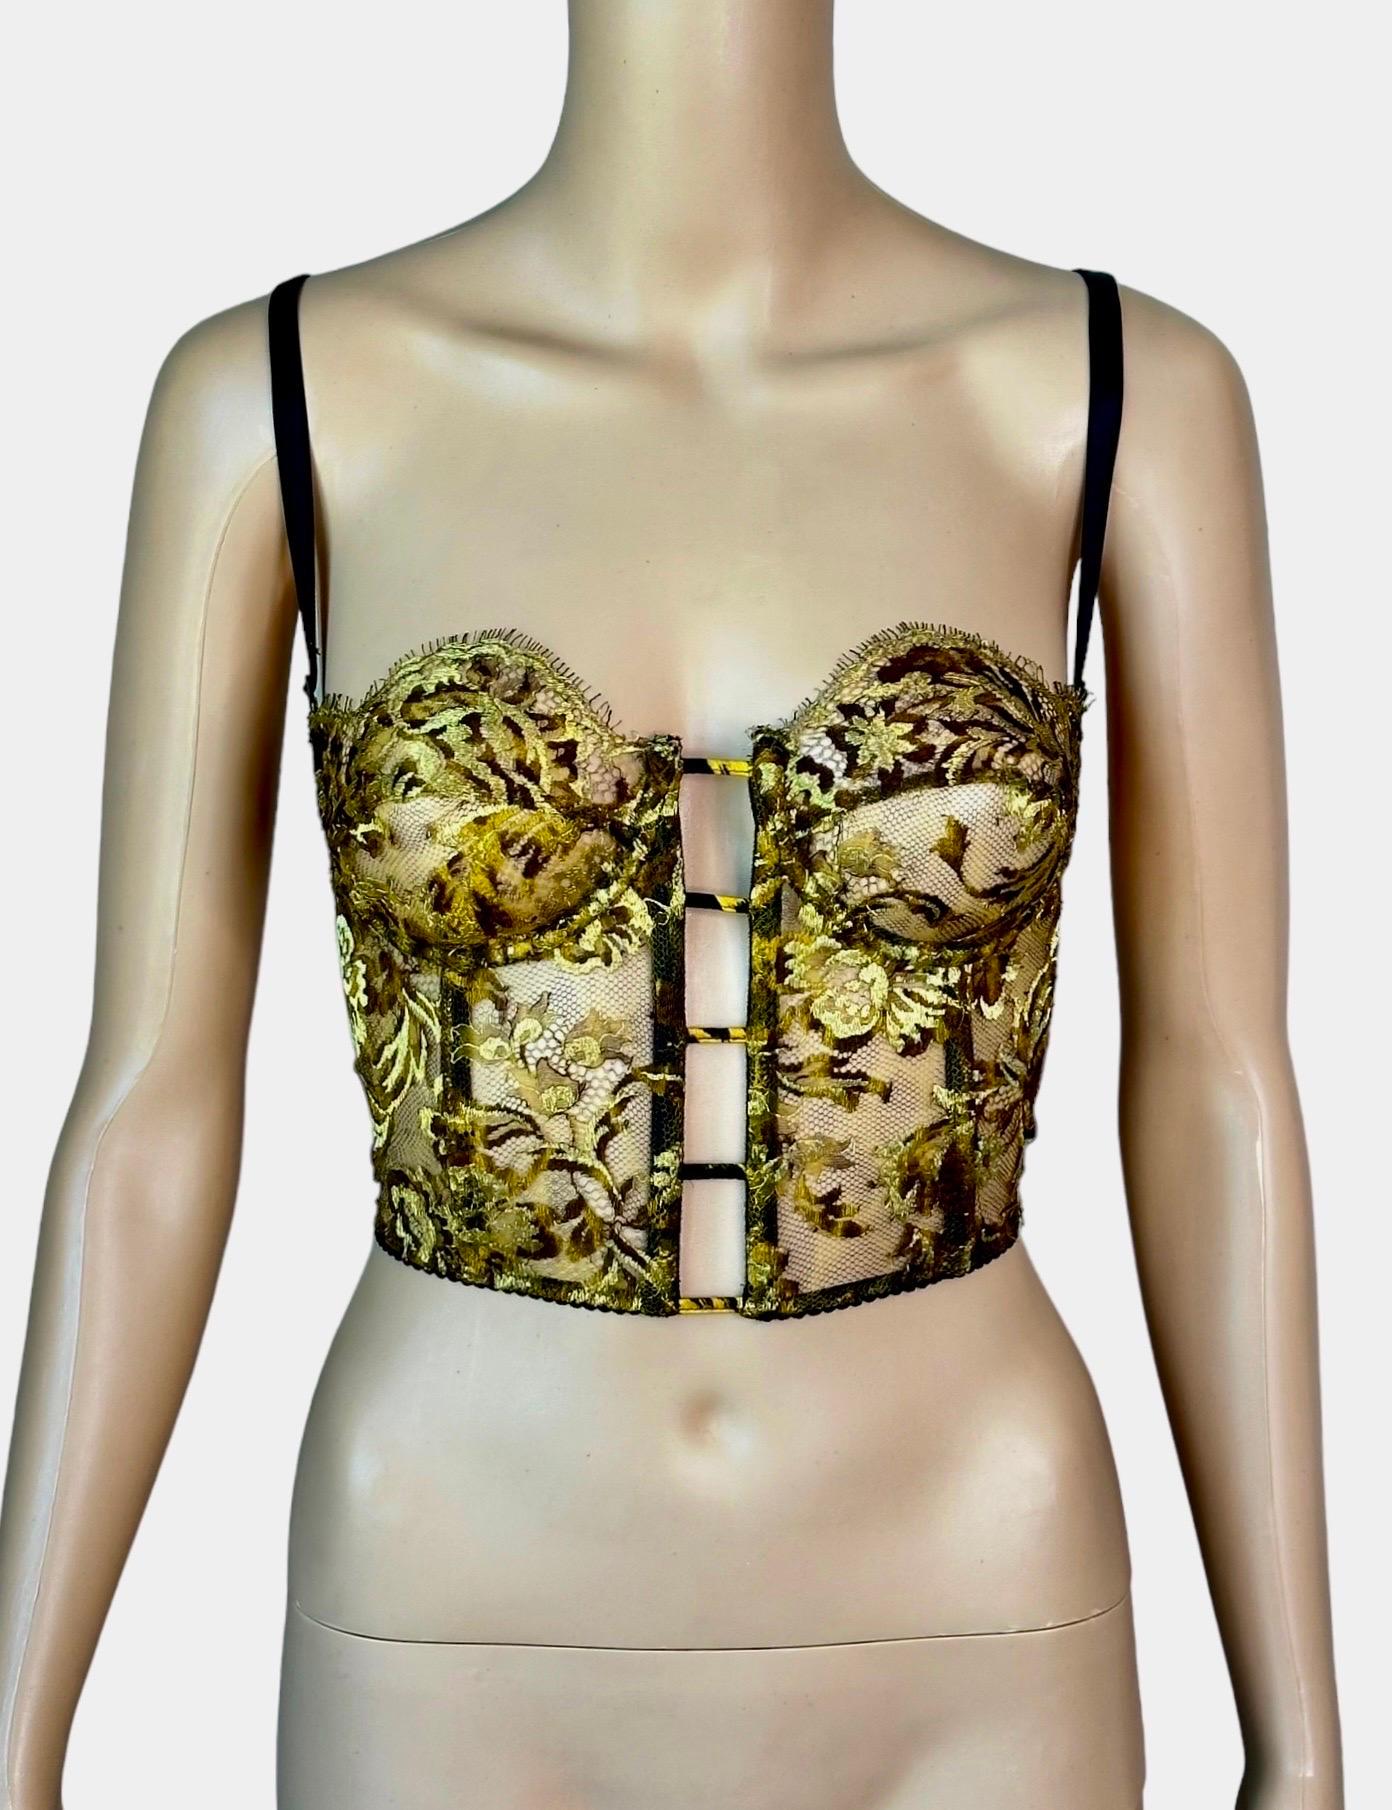 Brown Gianni Versace S/S 1992 Unworn Sheer Gold Embroidered Lace Bustier Bra Crop Top  For Sale